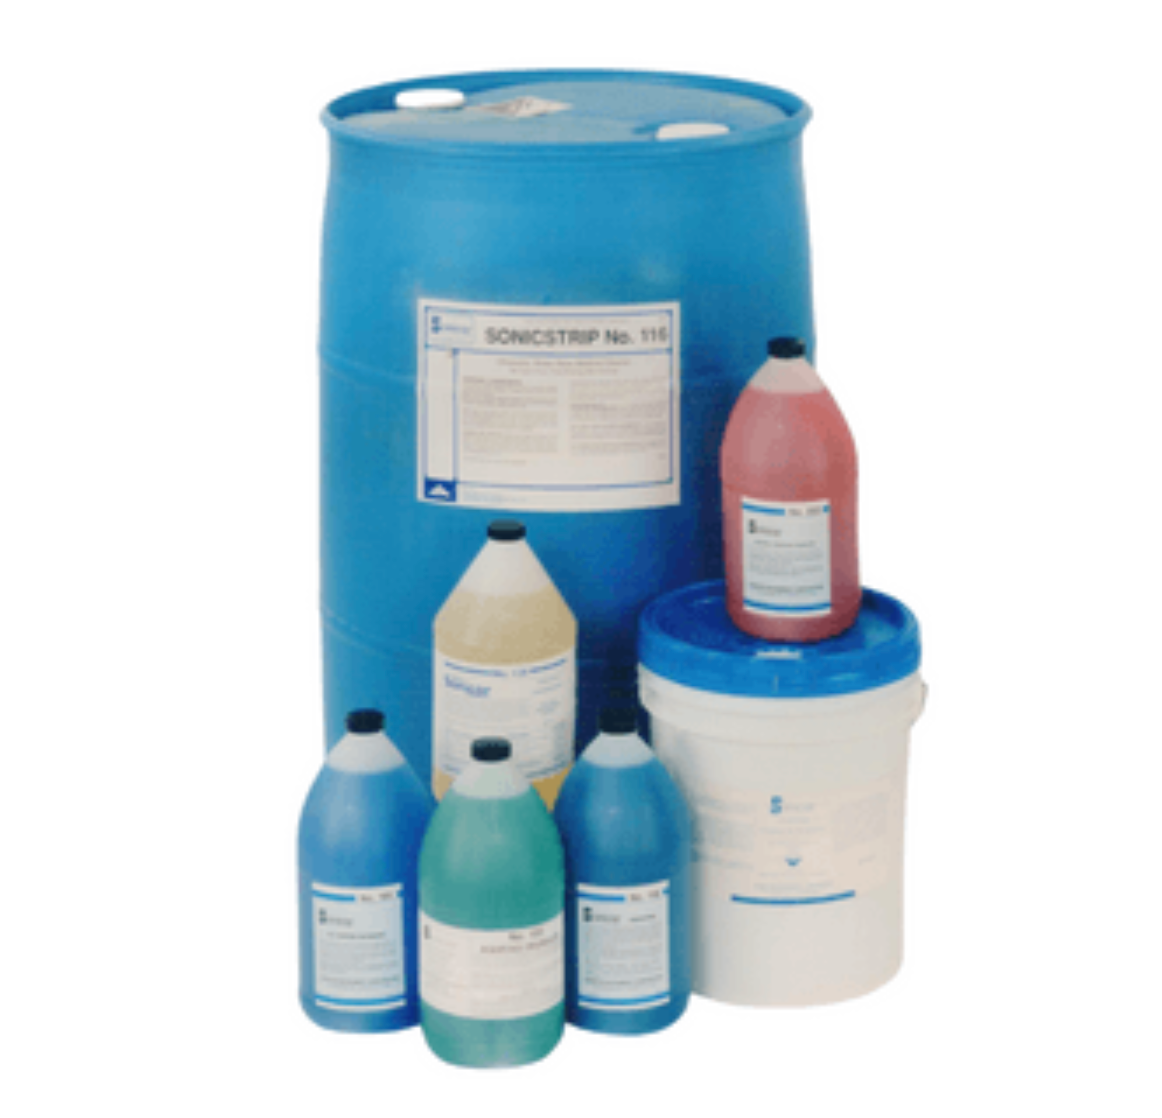 sonicor-sonichem-103-aqueous-degreaser-cleaning-solution-case-4gal